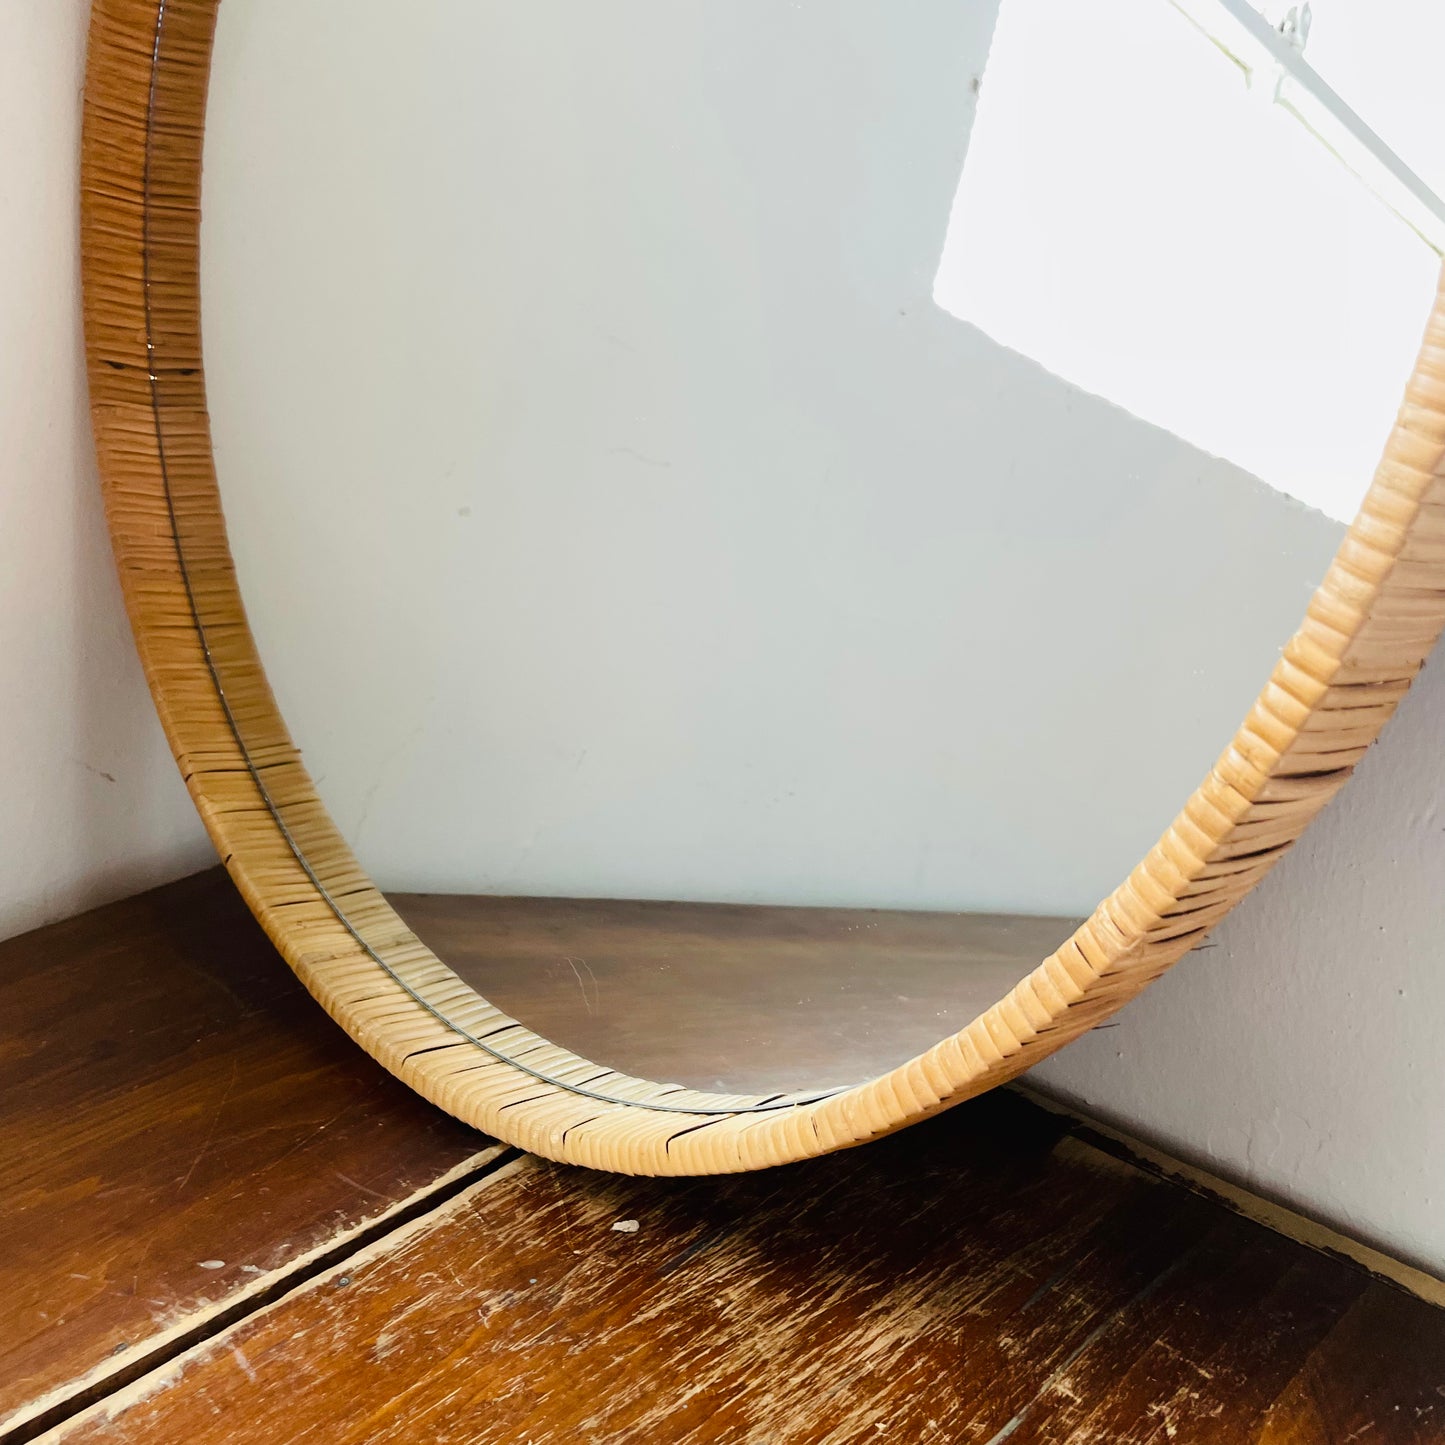 Rattan Wrapped Wood Mirror